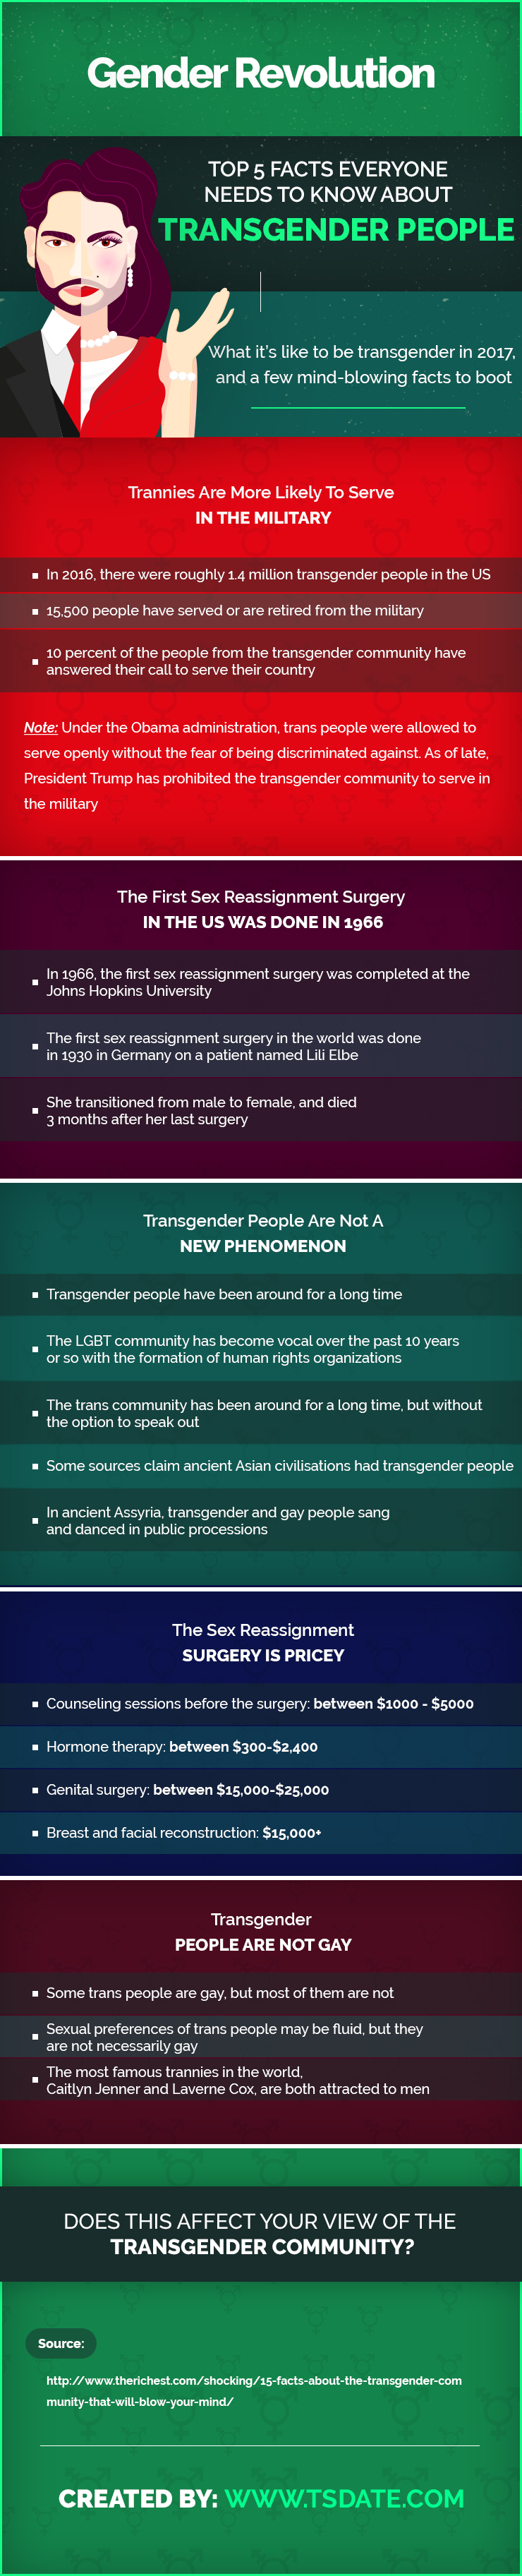 Gender Revolution: Top 5 Facts Everyone Needs To Know About Transgender People